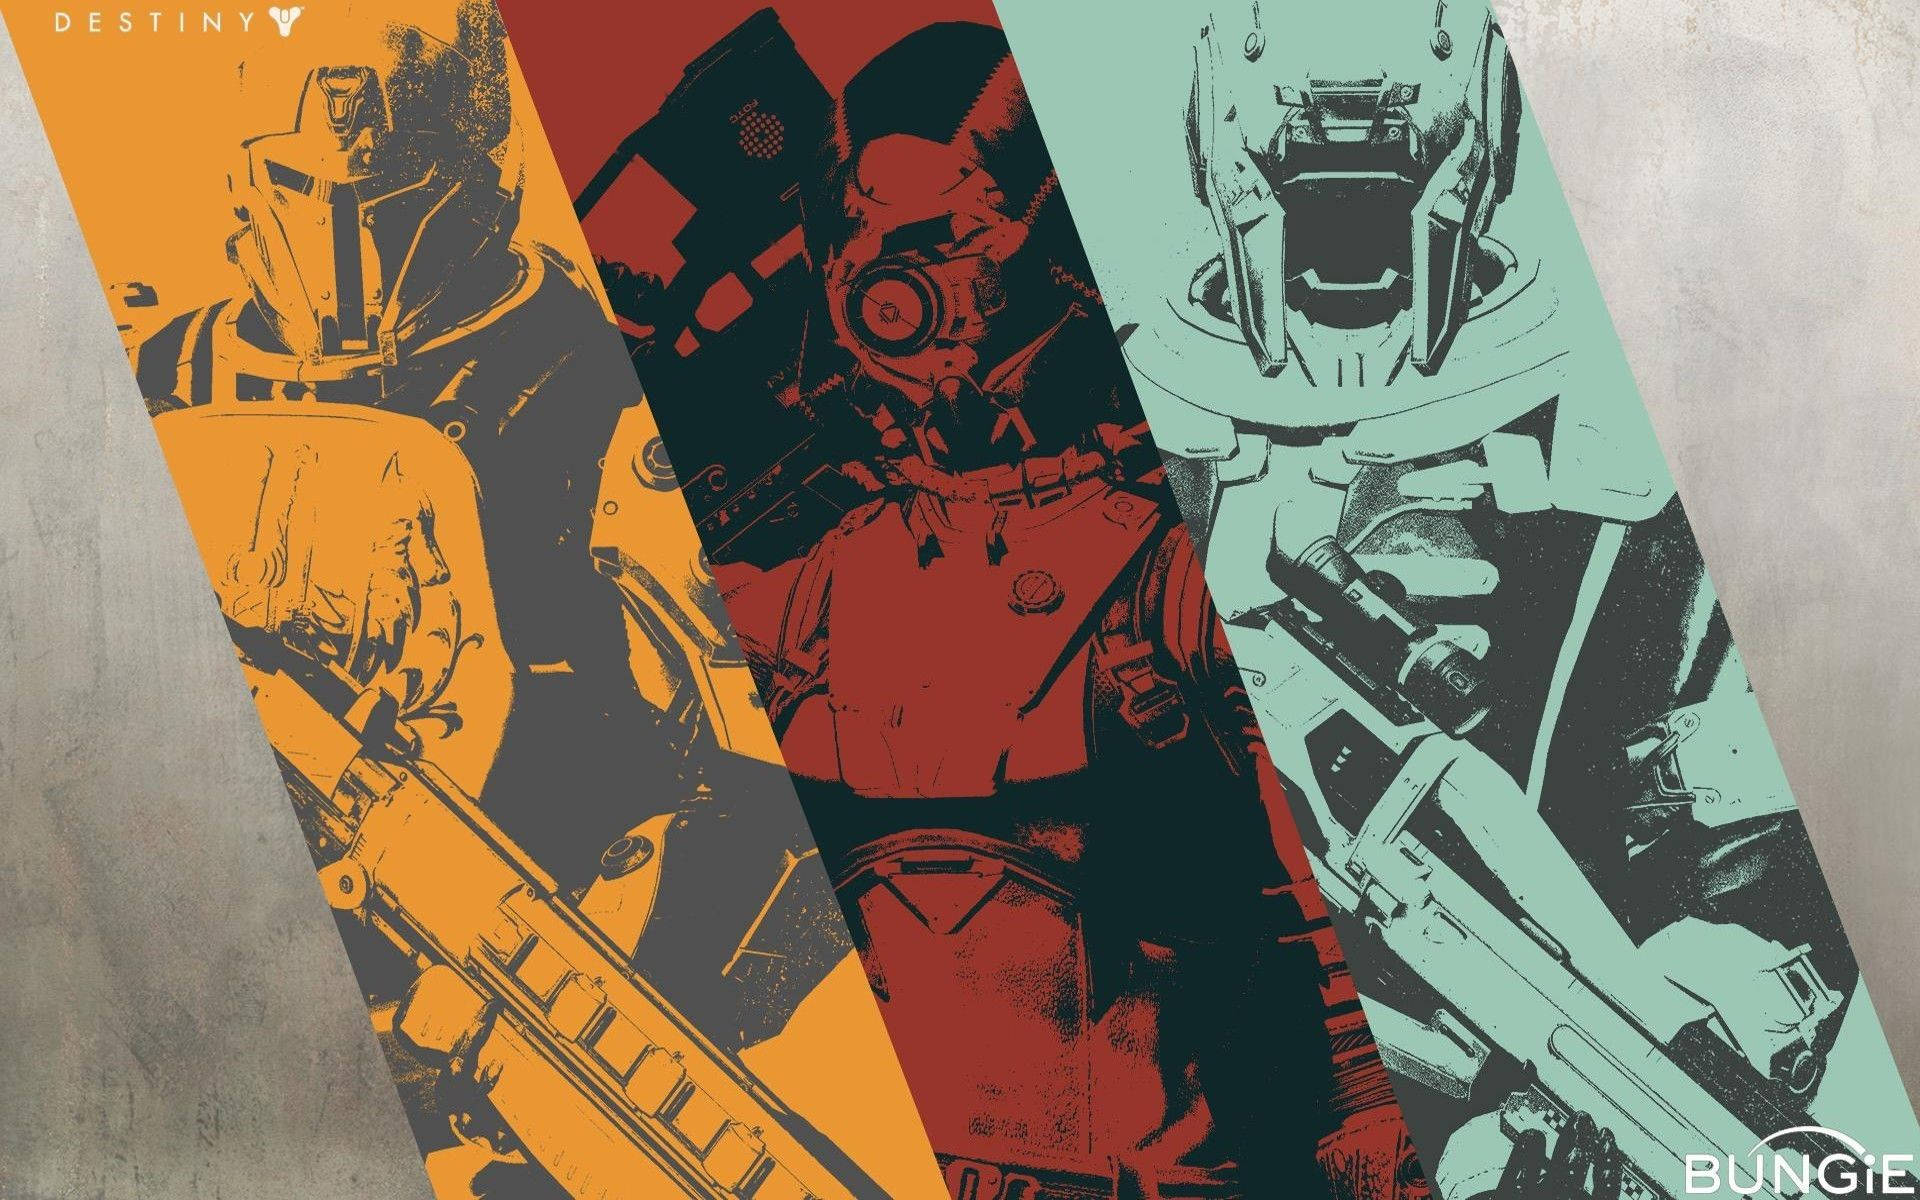 Epic Moments in the World of Destiny Wallpaper